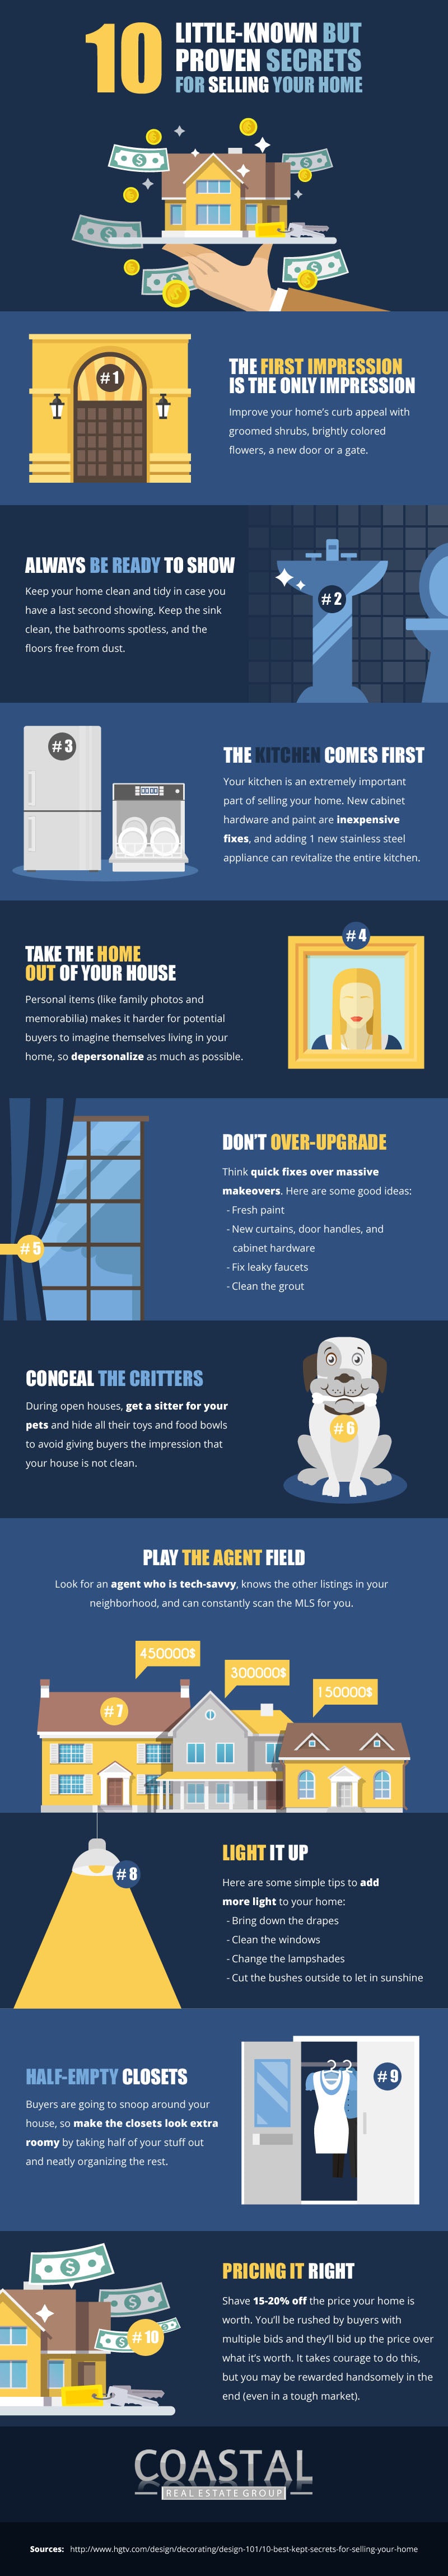 Security + Lighting. Secret to selling your home for the most money.